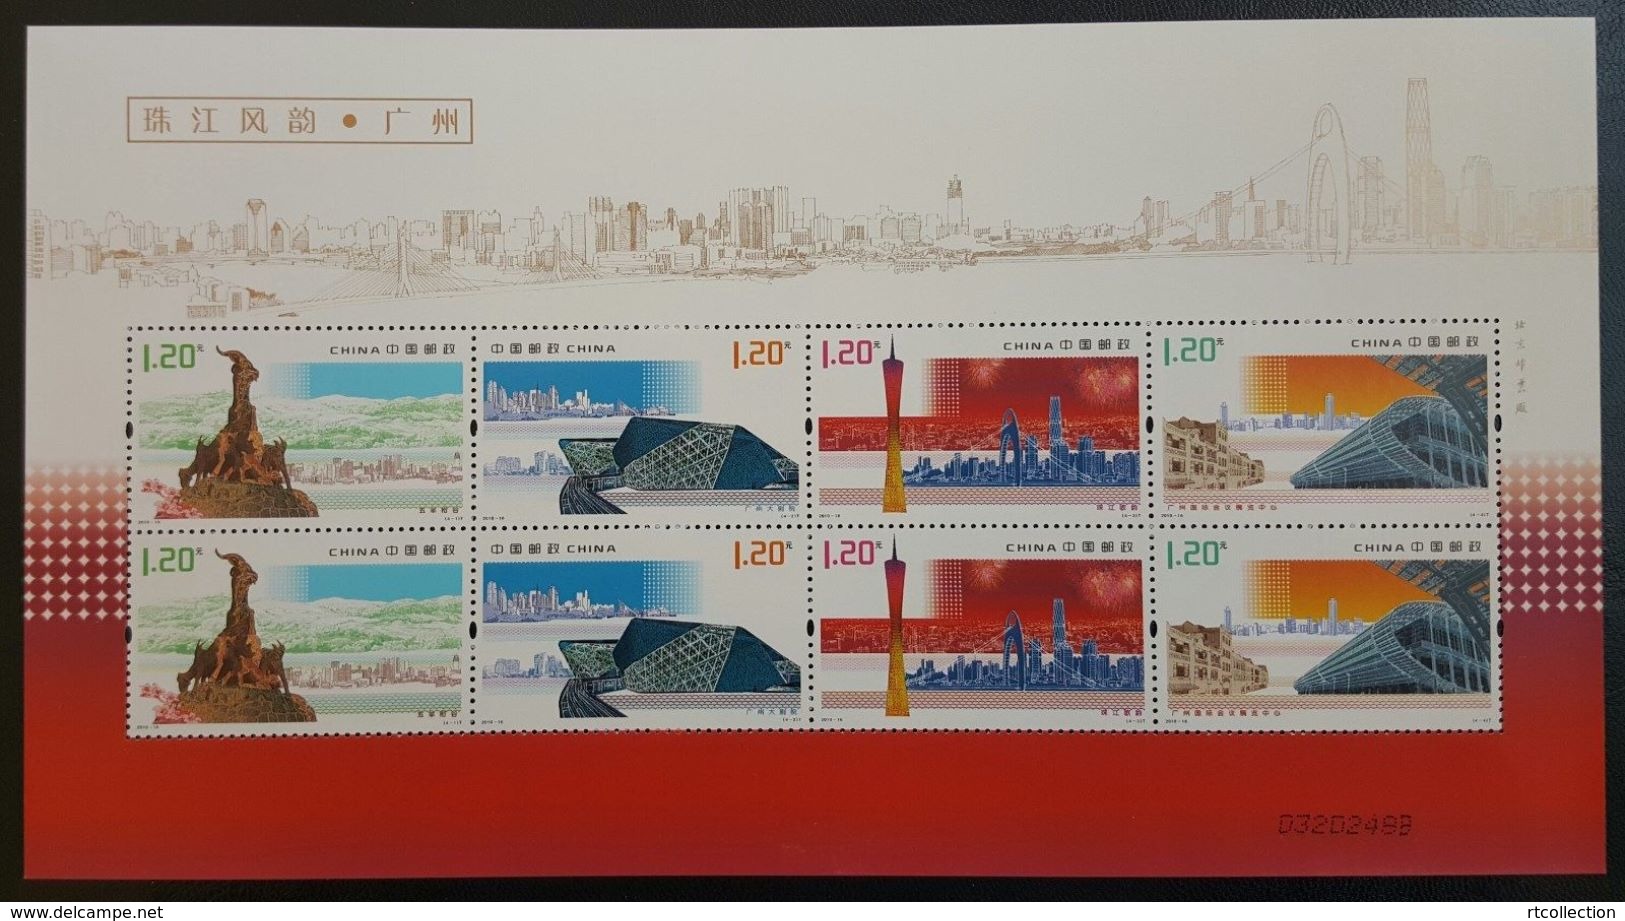 China 2010 Achitecture Featured Landscape Pearl River Scenes Goat Sculpture Art TV Tower Stamps MNH Sc#3831-1834 2010-16 - Collections, Lots & Series